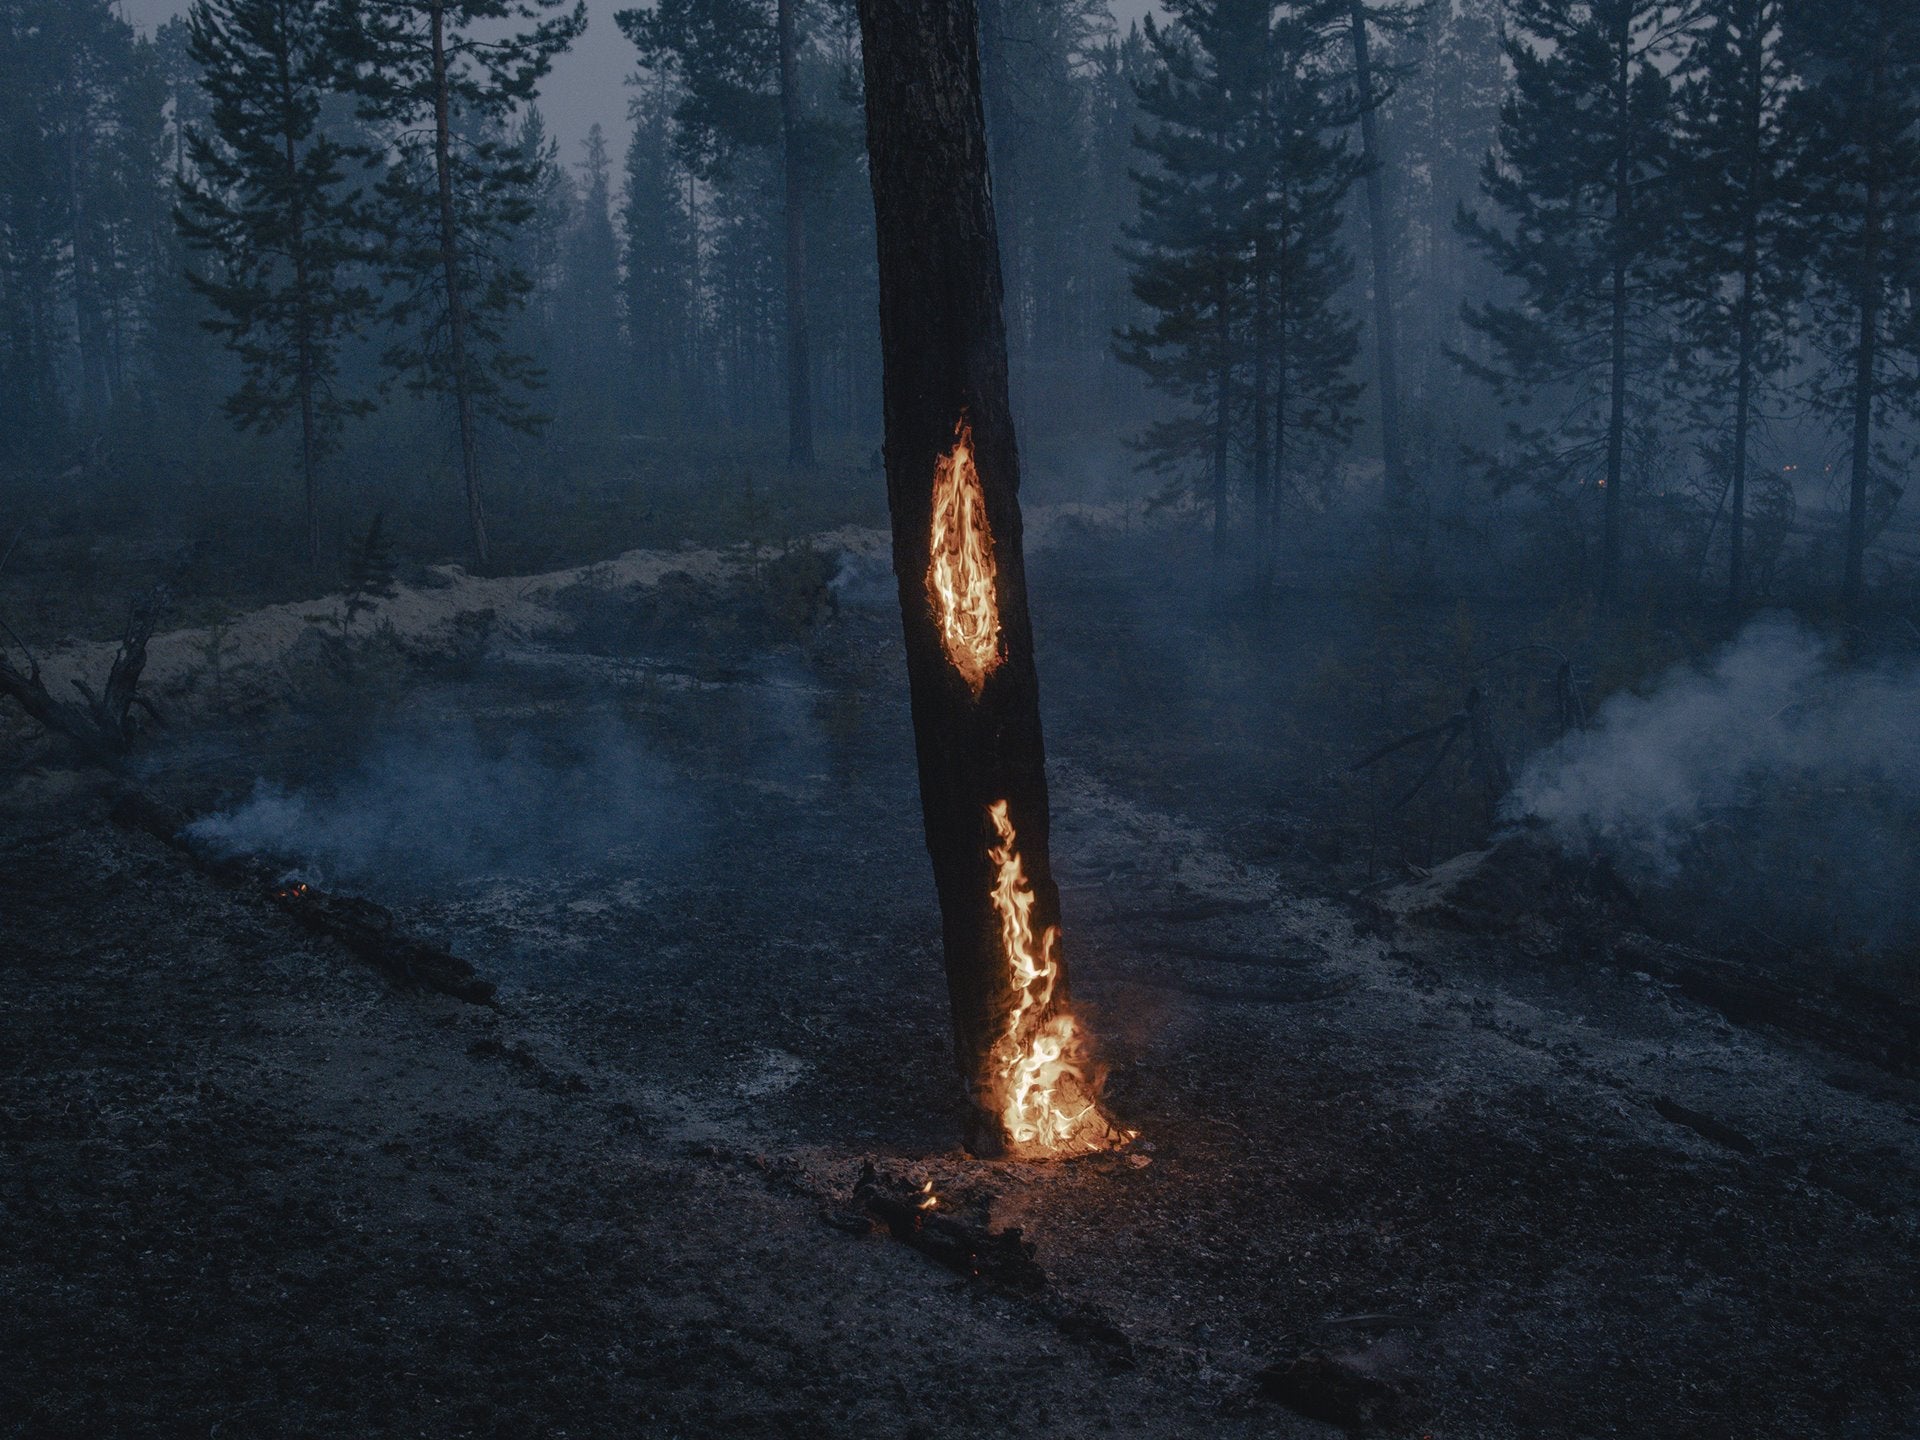 Russian-German photographer Nanna Heitmann won the Stories category for As Frozen Land Burns, her series documenting forest fires and the fallout of them in Siberia, Russia.